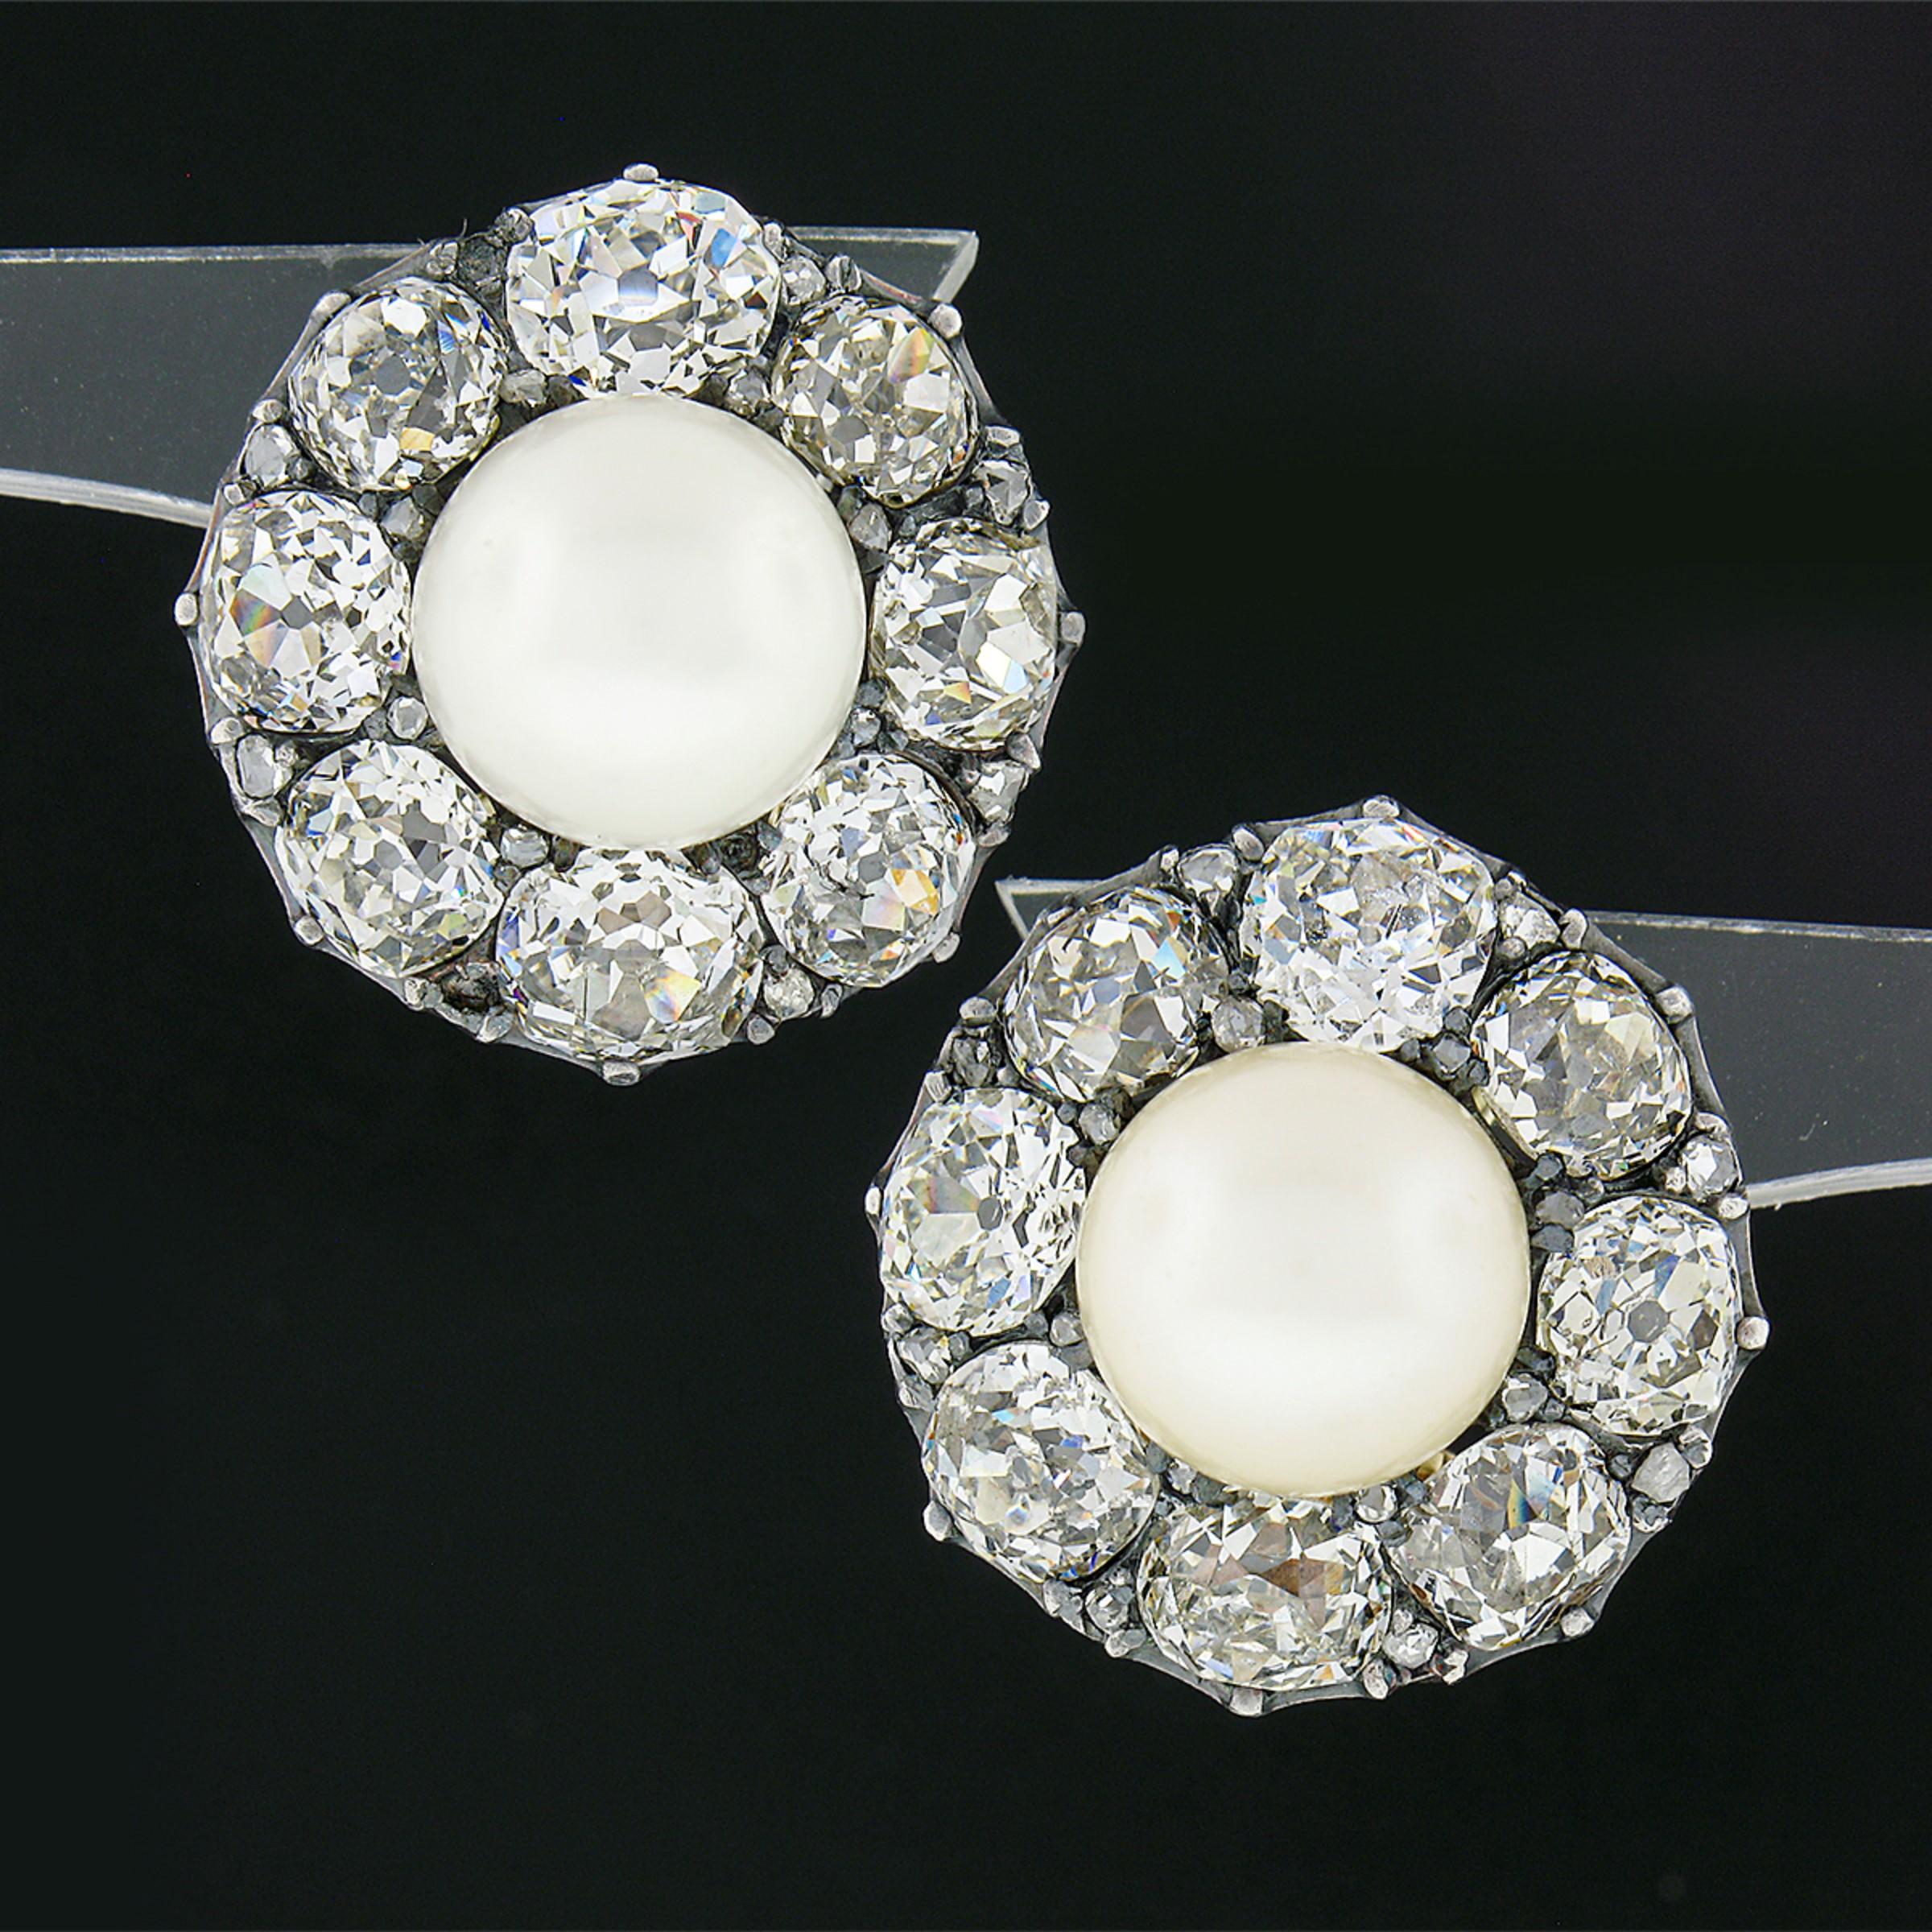 This gorgeous and fancy pair of antique cocktail earrings was crafted in solid 14k yellow gold with a solid silver top during the Georgian period. Both earrings feature a, GIA certified, natural saltwater pearl solitaire which is surrounded by a